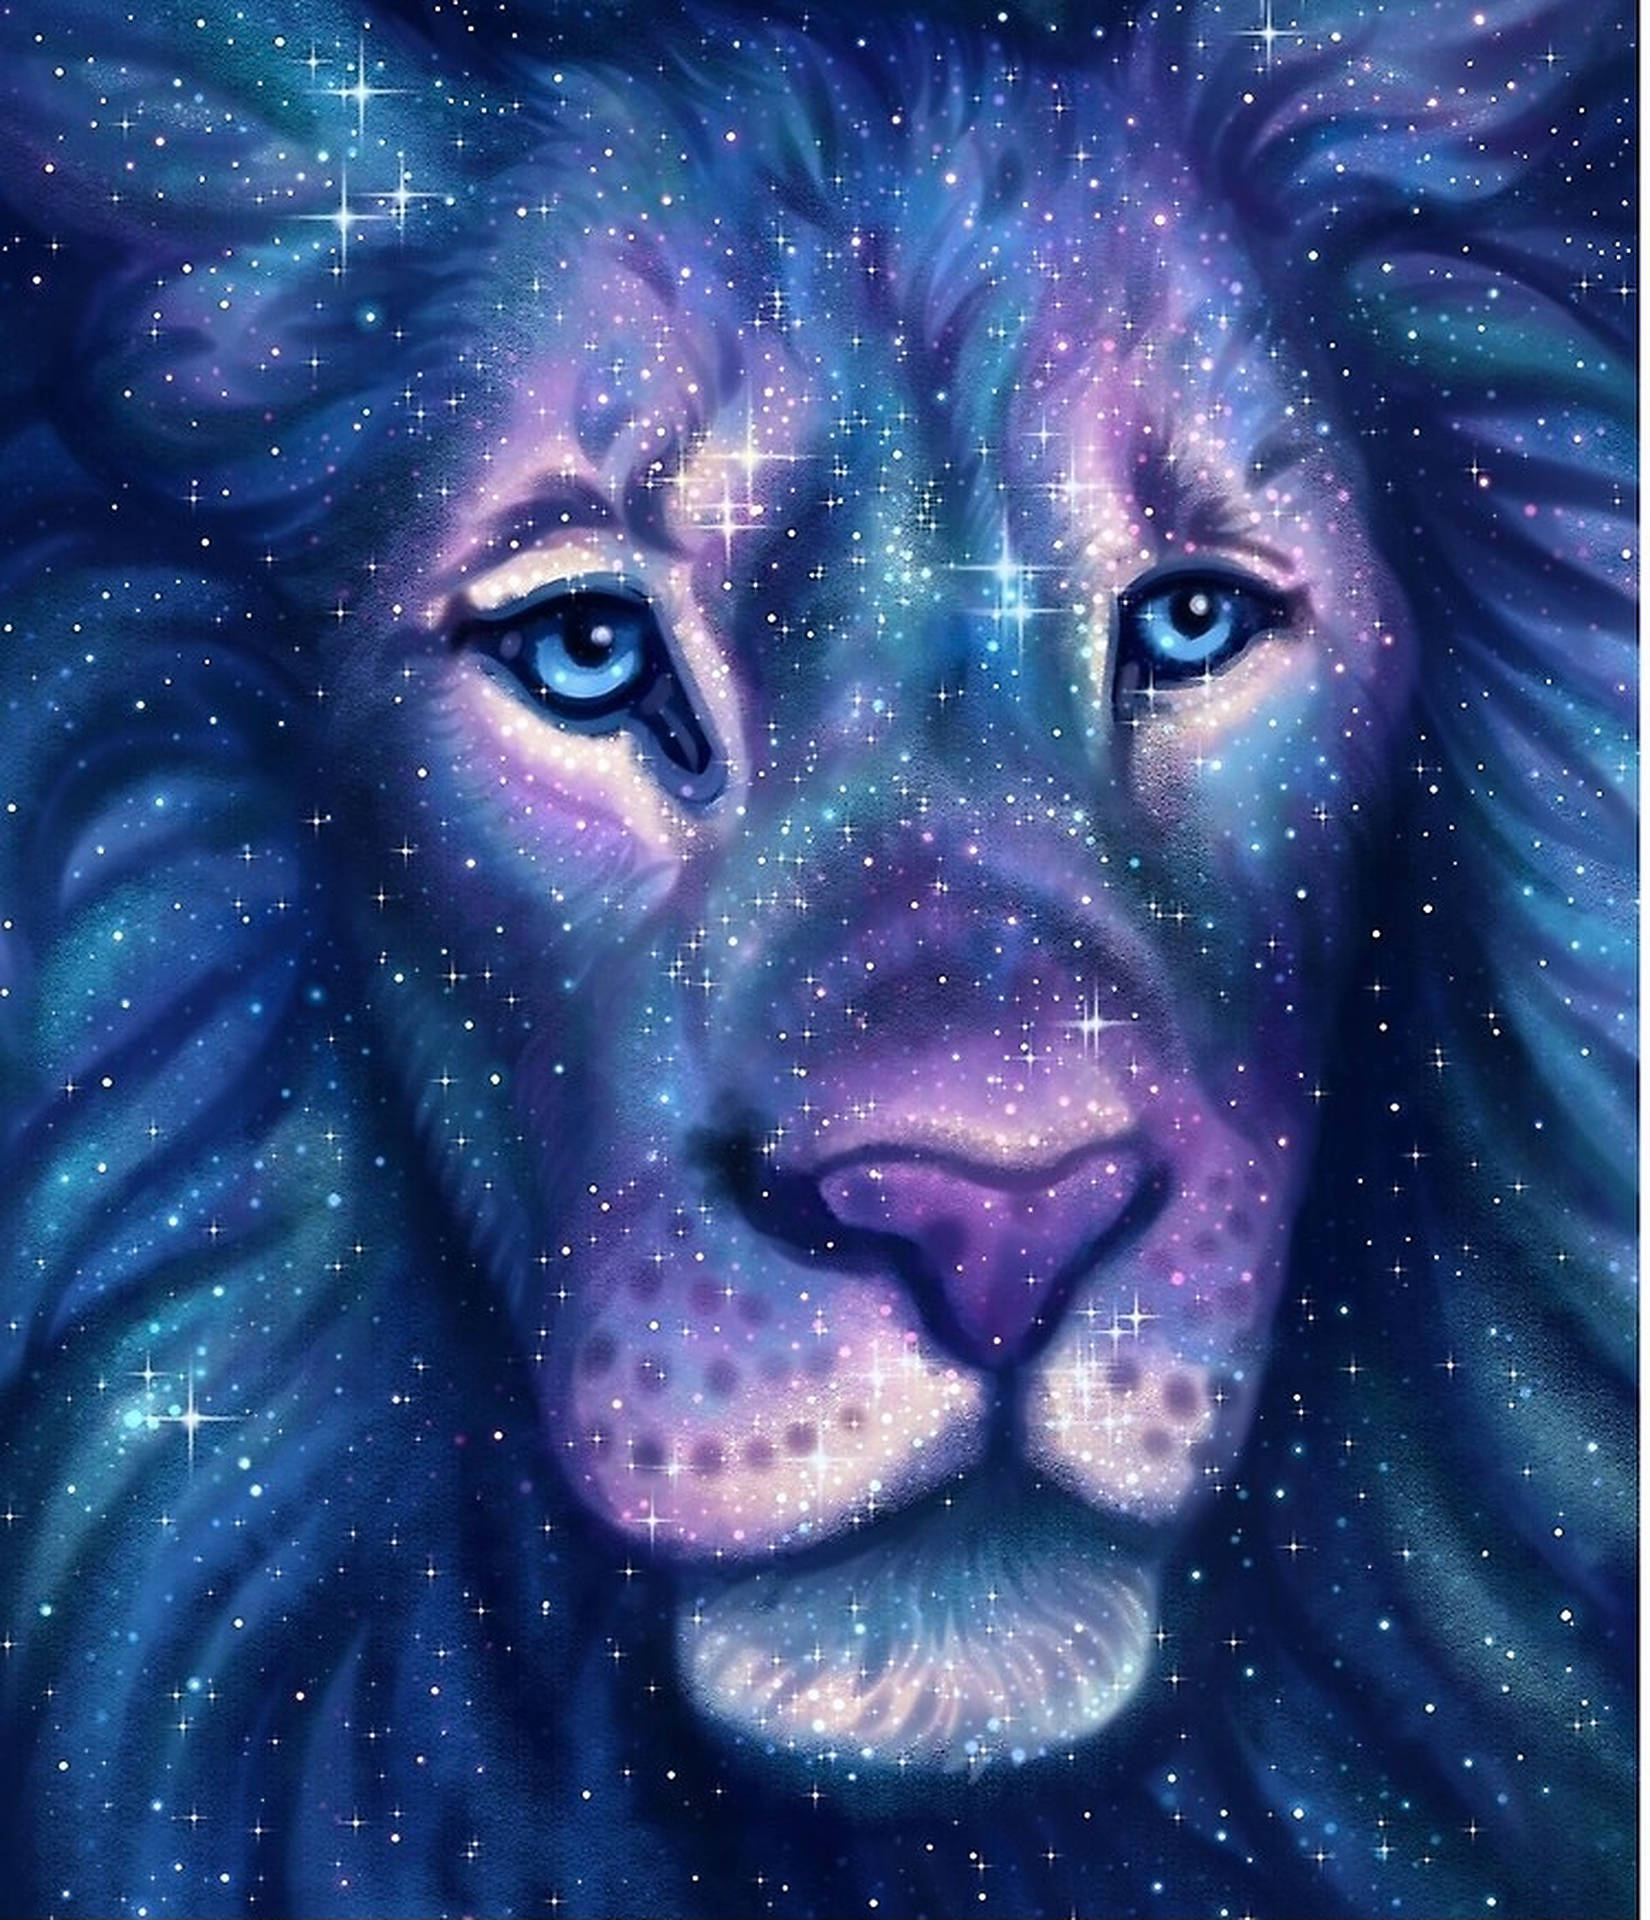 Caption: Majestic Galaxy Lion Roaring in the Infinity of Universe Wallpaper